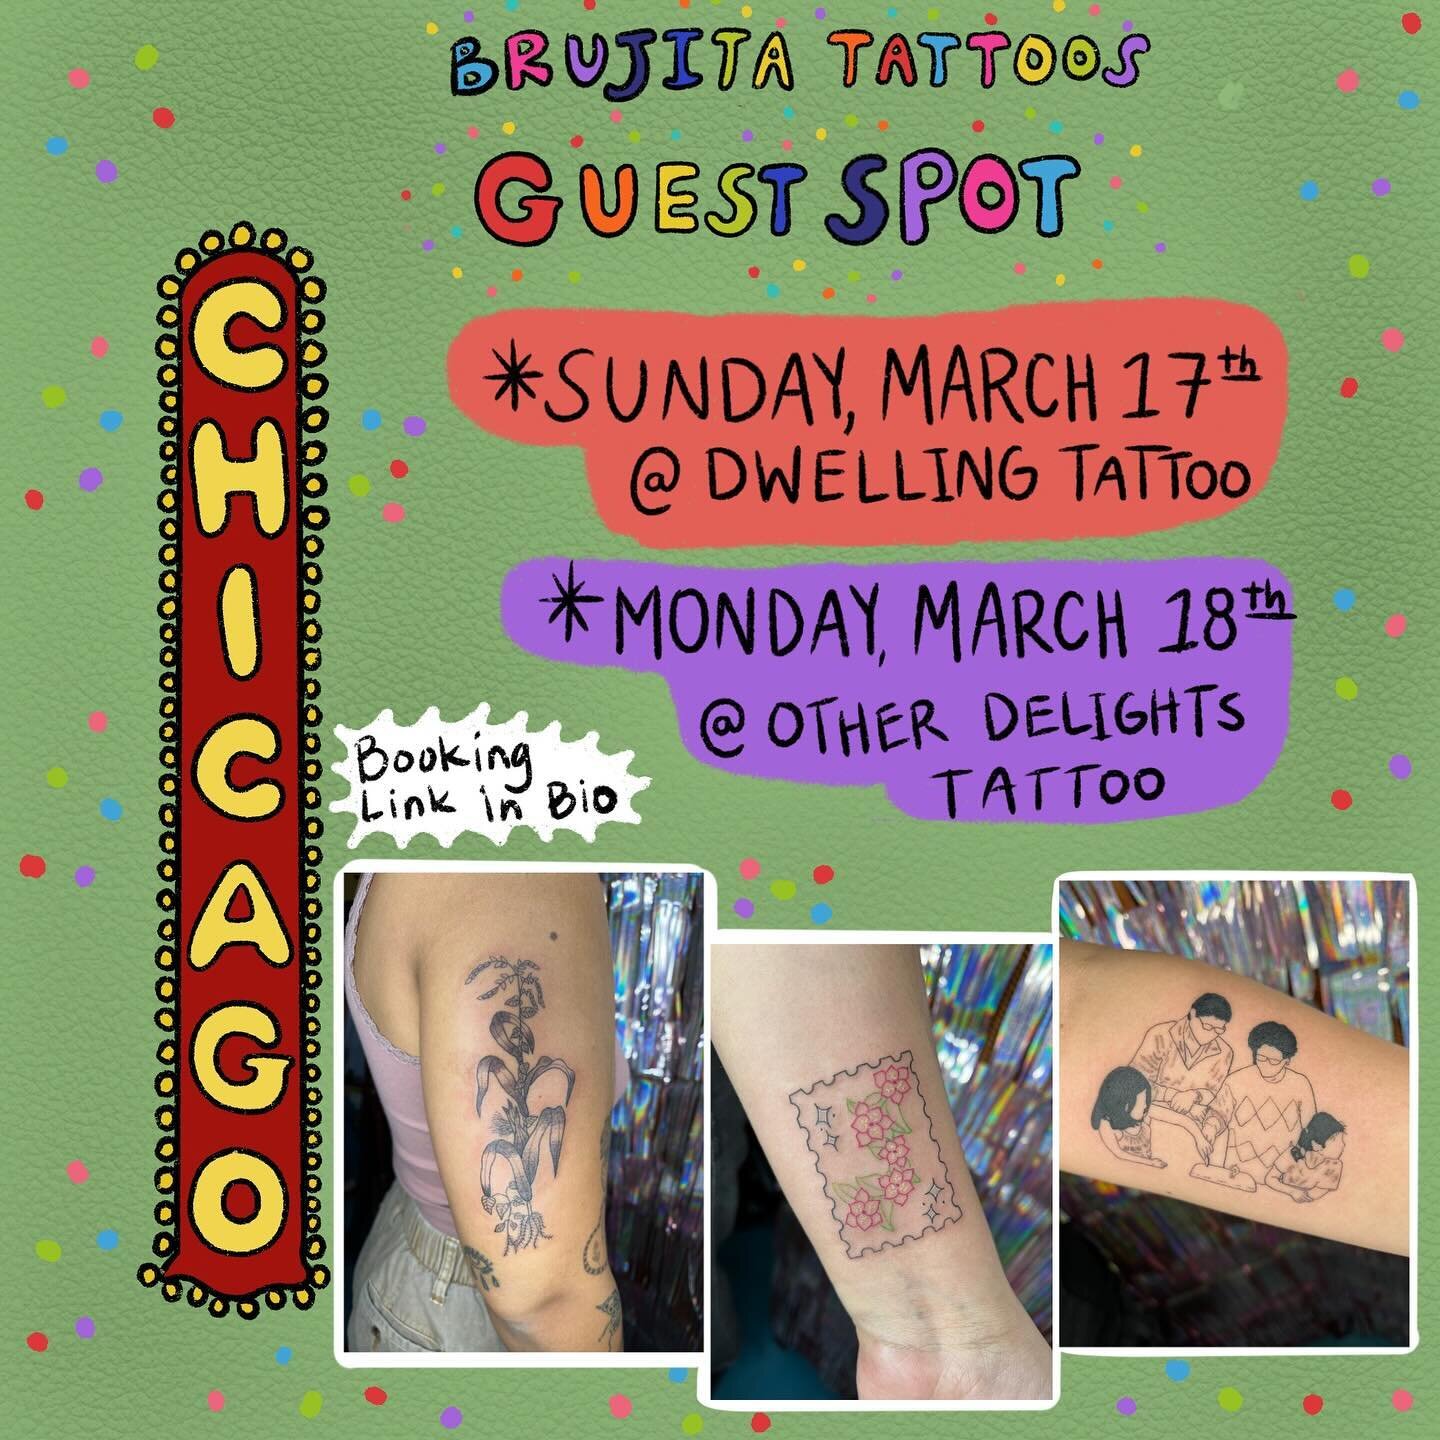 🤩 Chicago Cuties!!!! I and @chumbystudios are coming to your city to do some cool tattoos 💖!!! Ahhhh im so excited for this trip! My first time guesting outside of California 🤗. I will be guesting Sunday March 17th @dwellingtattoo and then Monday 